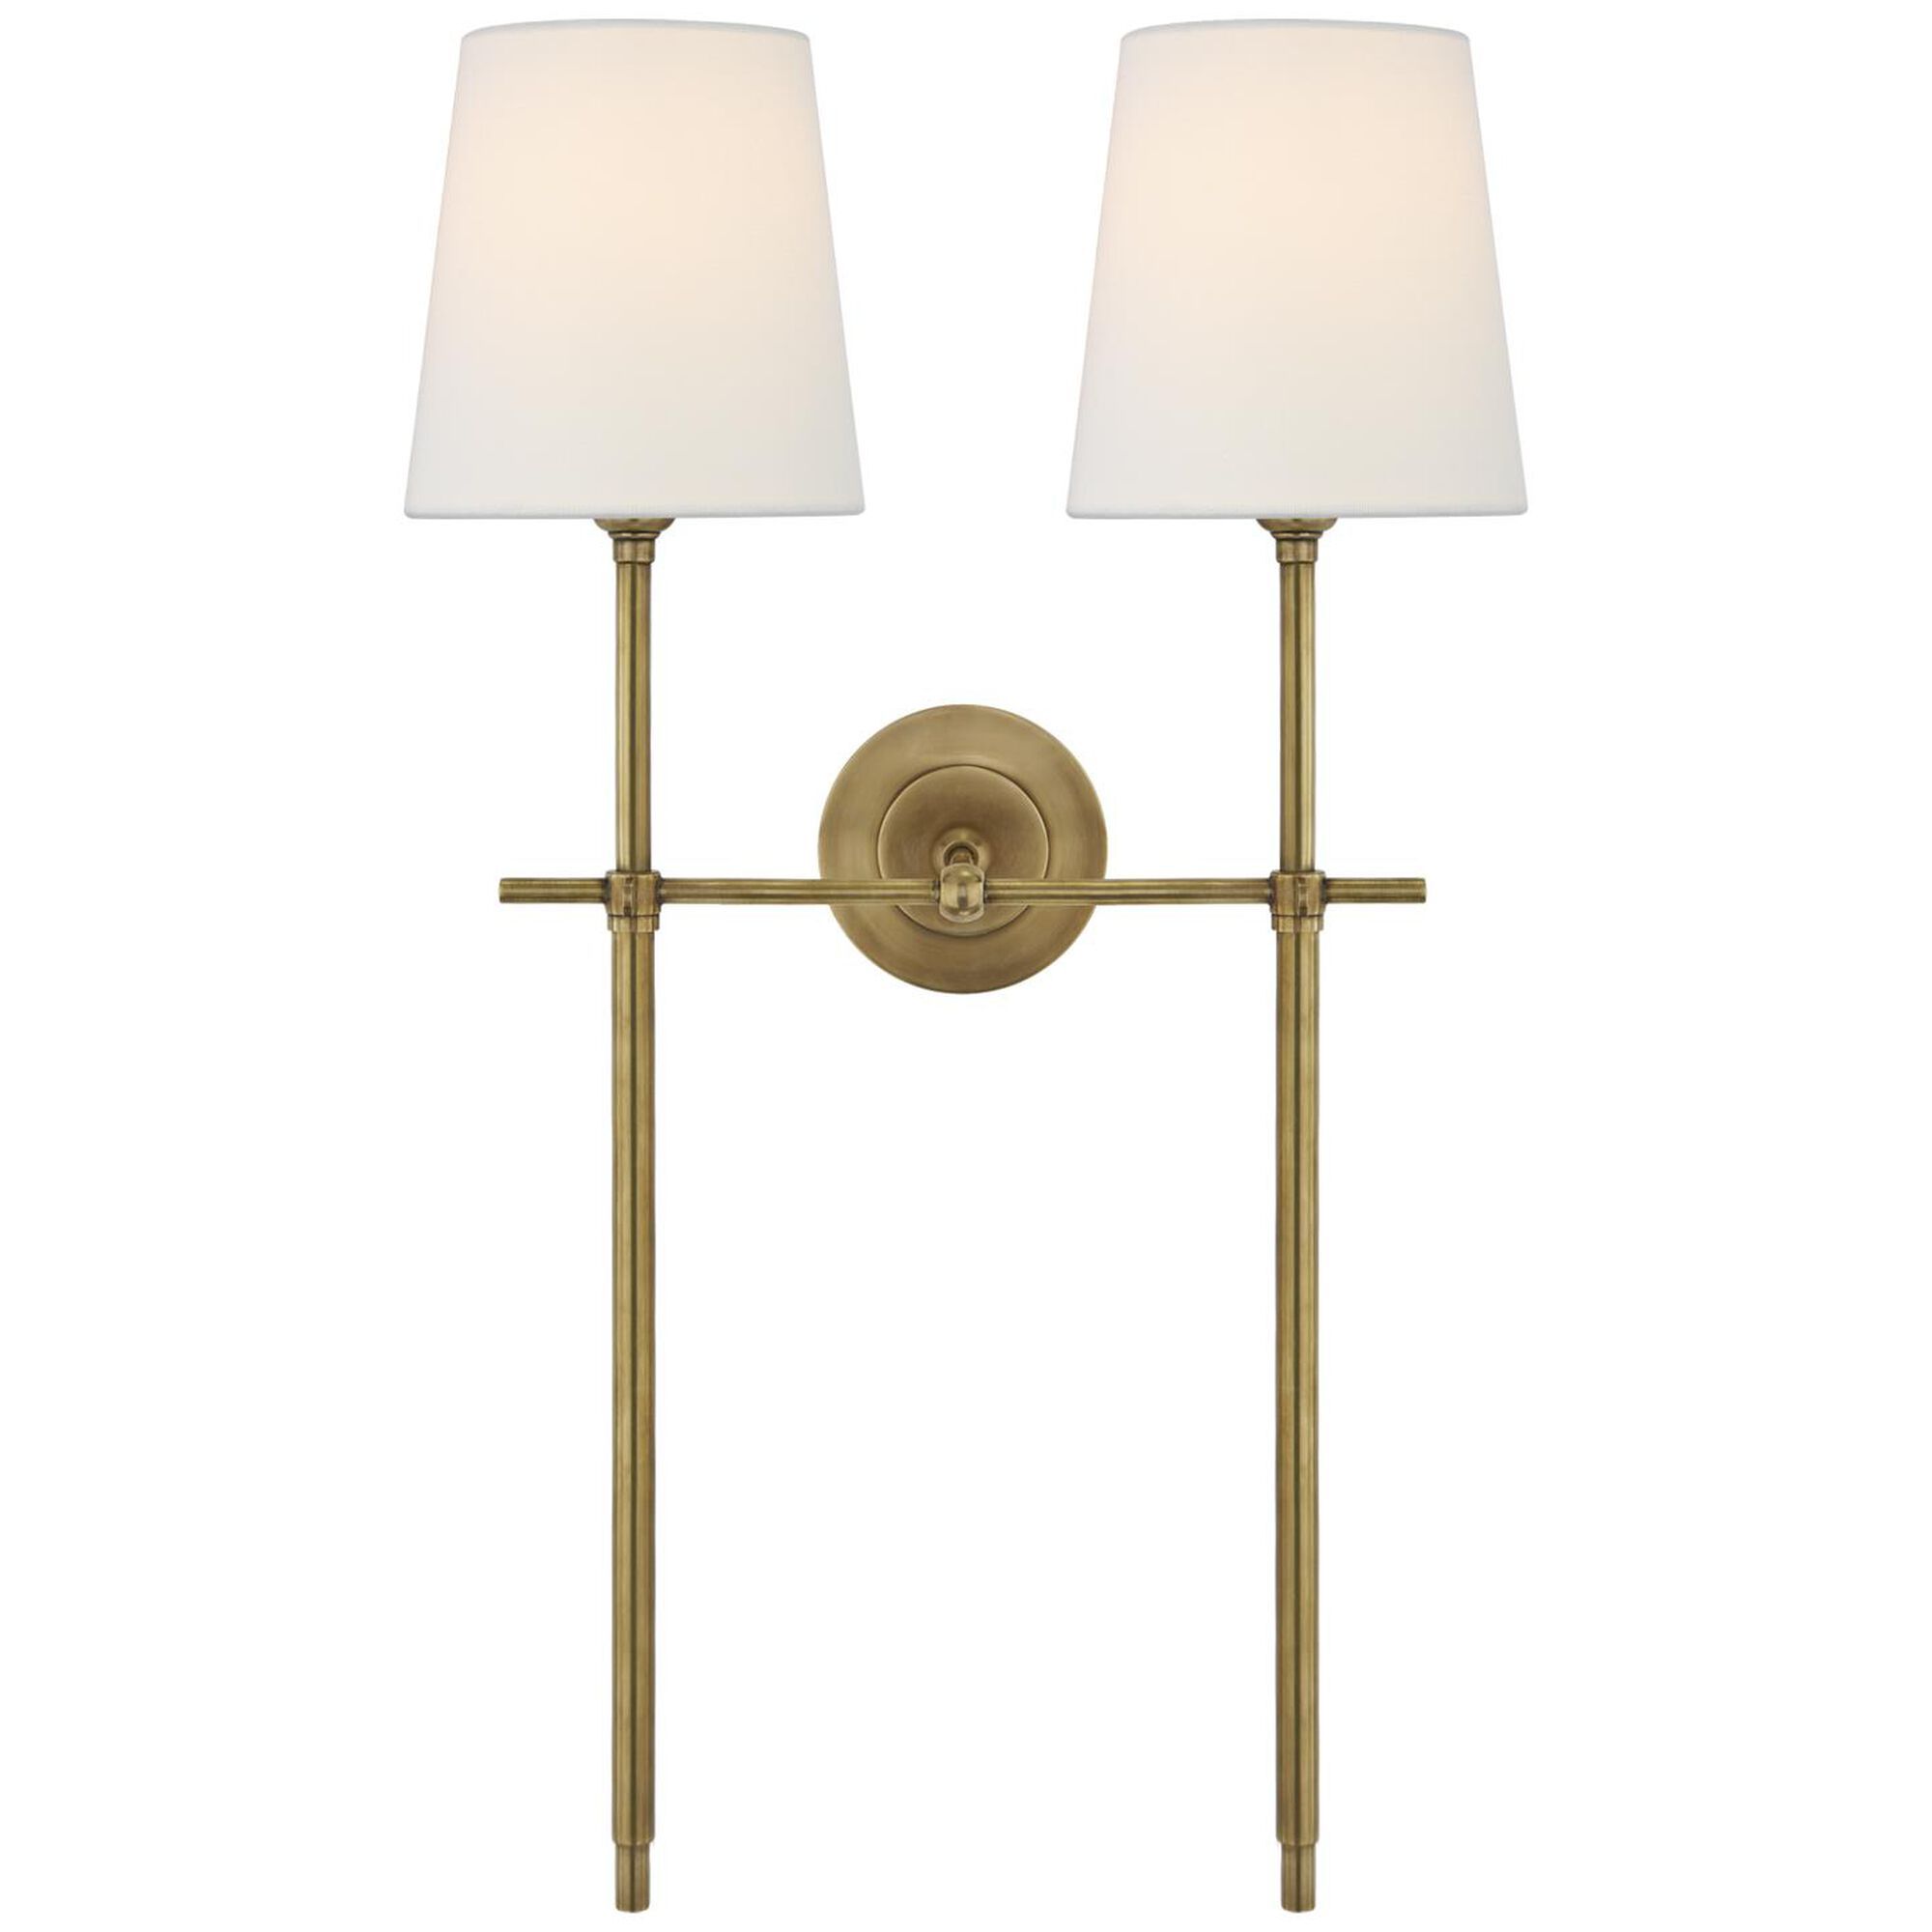 Thomas O'Brien Bryant 26 Inch Wall Sconce by Visual Comfort Signature Collection | 1800 Lighting